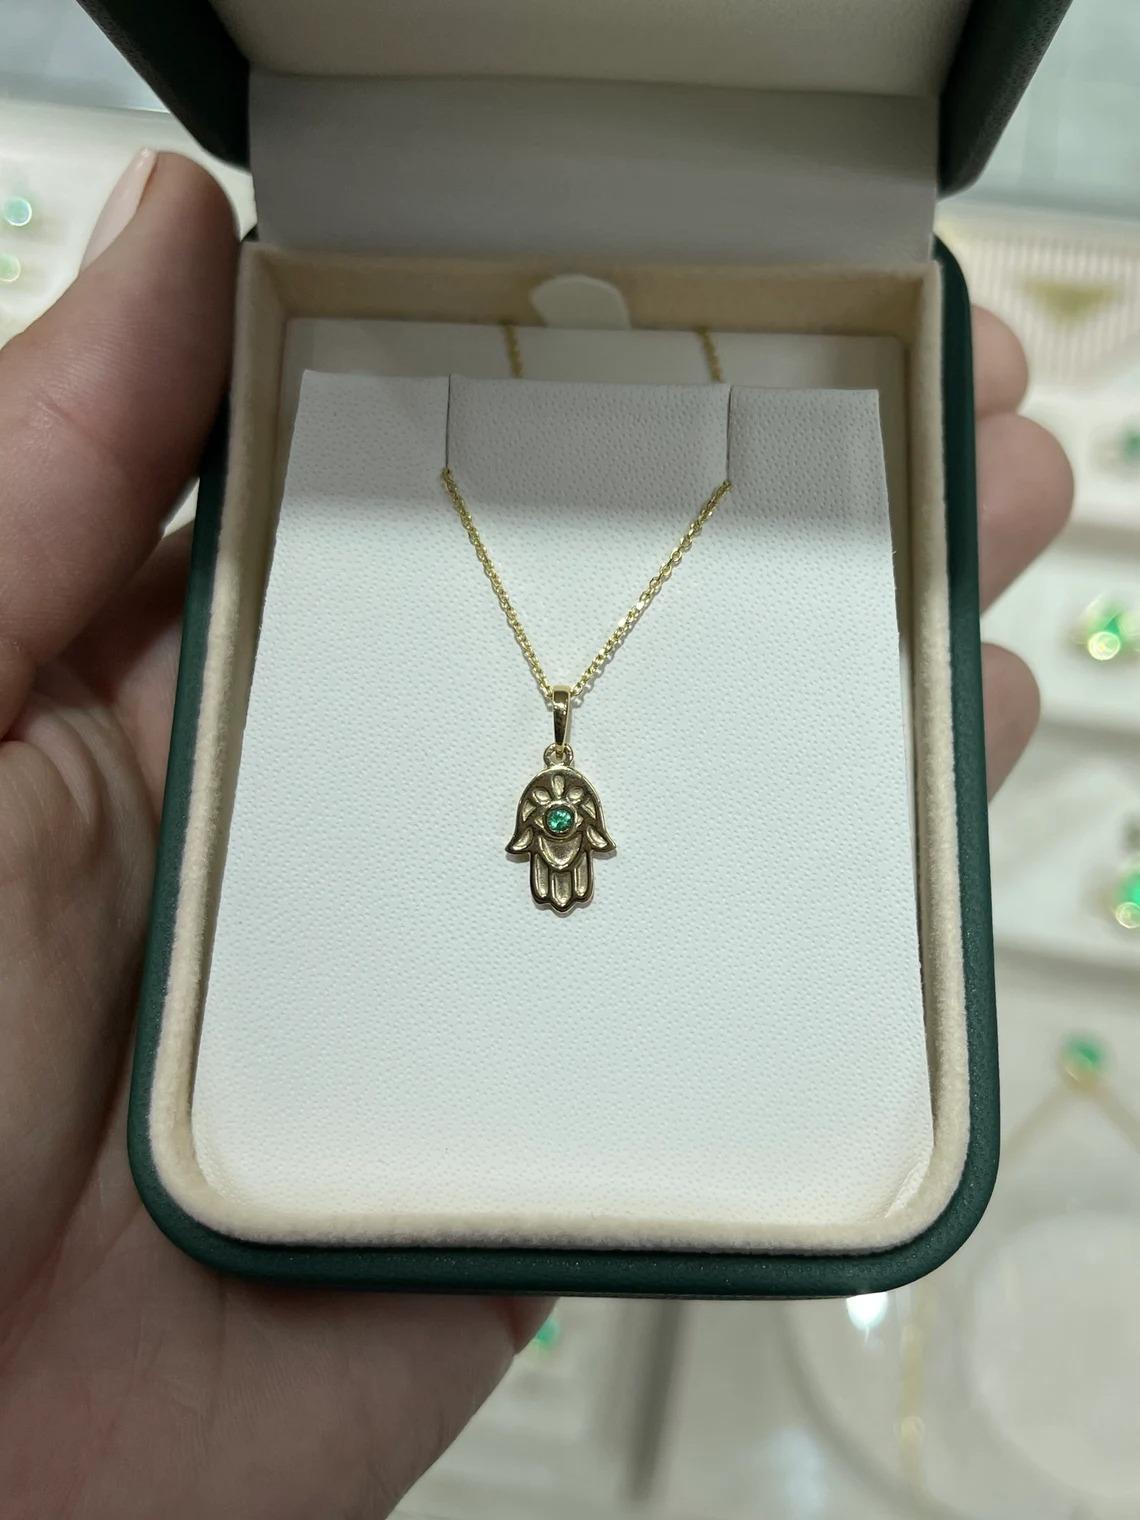 A gorgeous hamsa that features a stunning dainty round cut emerald in the very center. Skillfully crafted and set in 14K gold. The Hamsa (also known as Khamsa) is a hand-shaped amulet used for protection by both Jewish and Muslim people. Its name